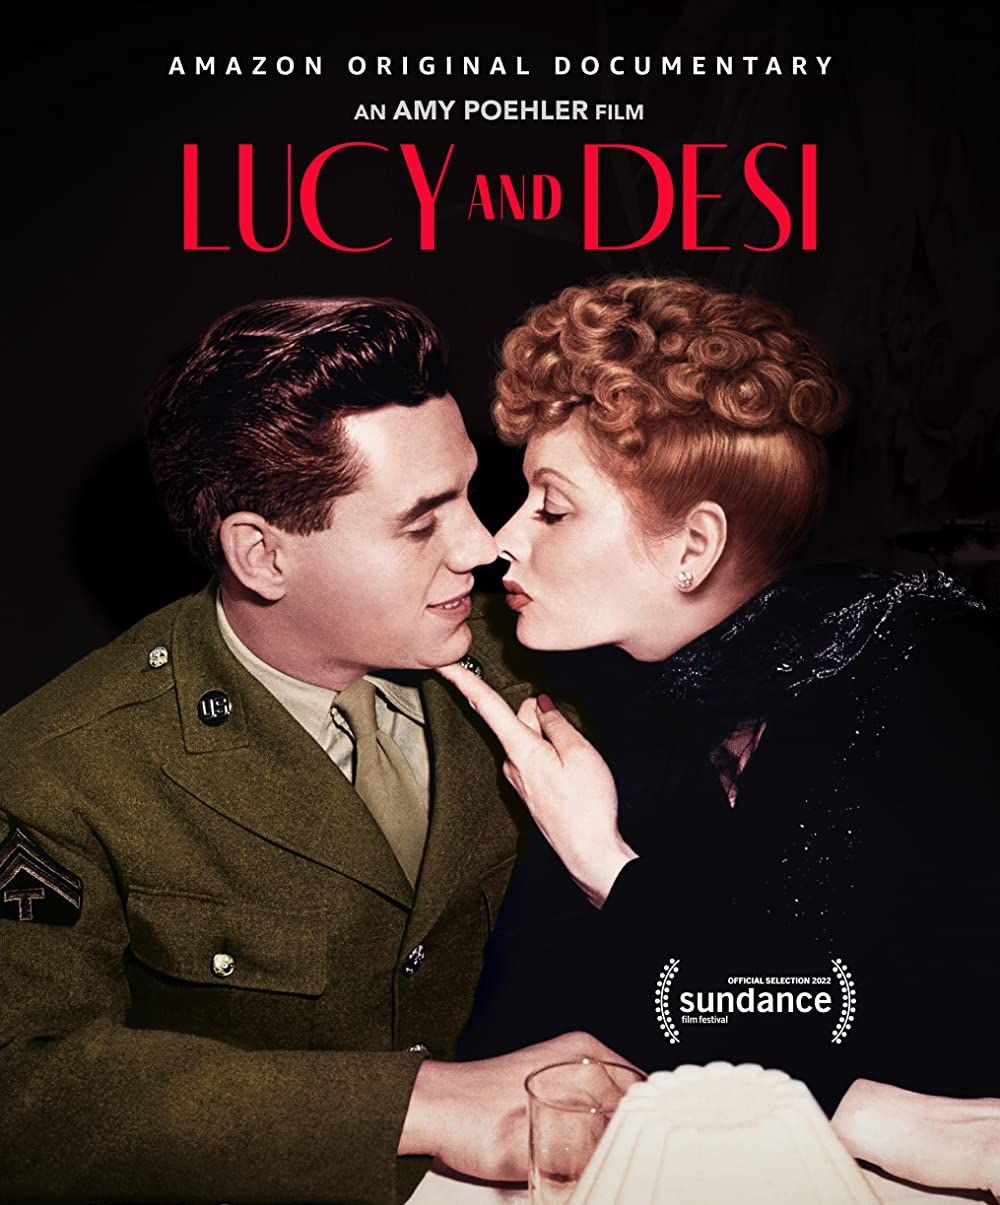 Is Lucy and Desi available on Amazon Prime